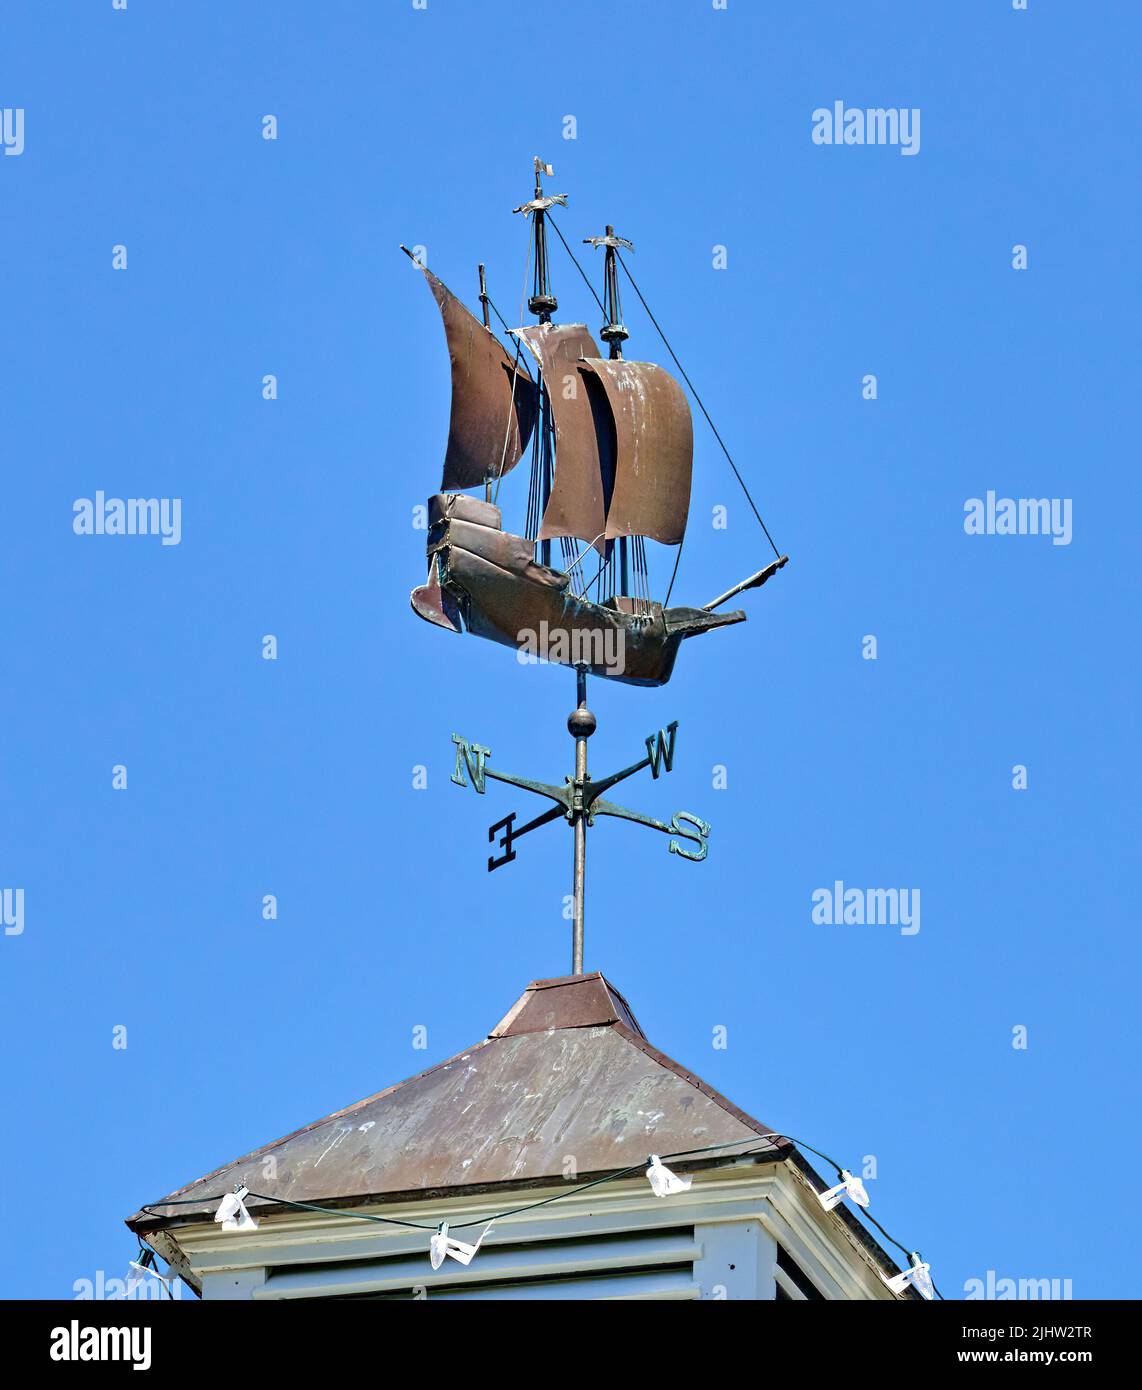 Sail Boat Weather vain in Hyannis.Ma The nautical theme pays homage to the naval history of the city. Stock Photo